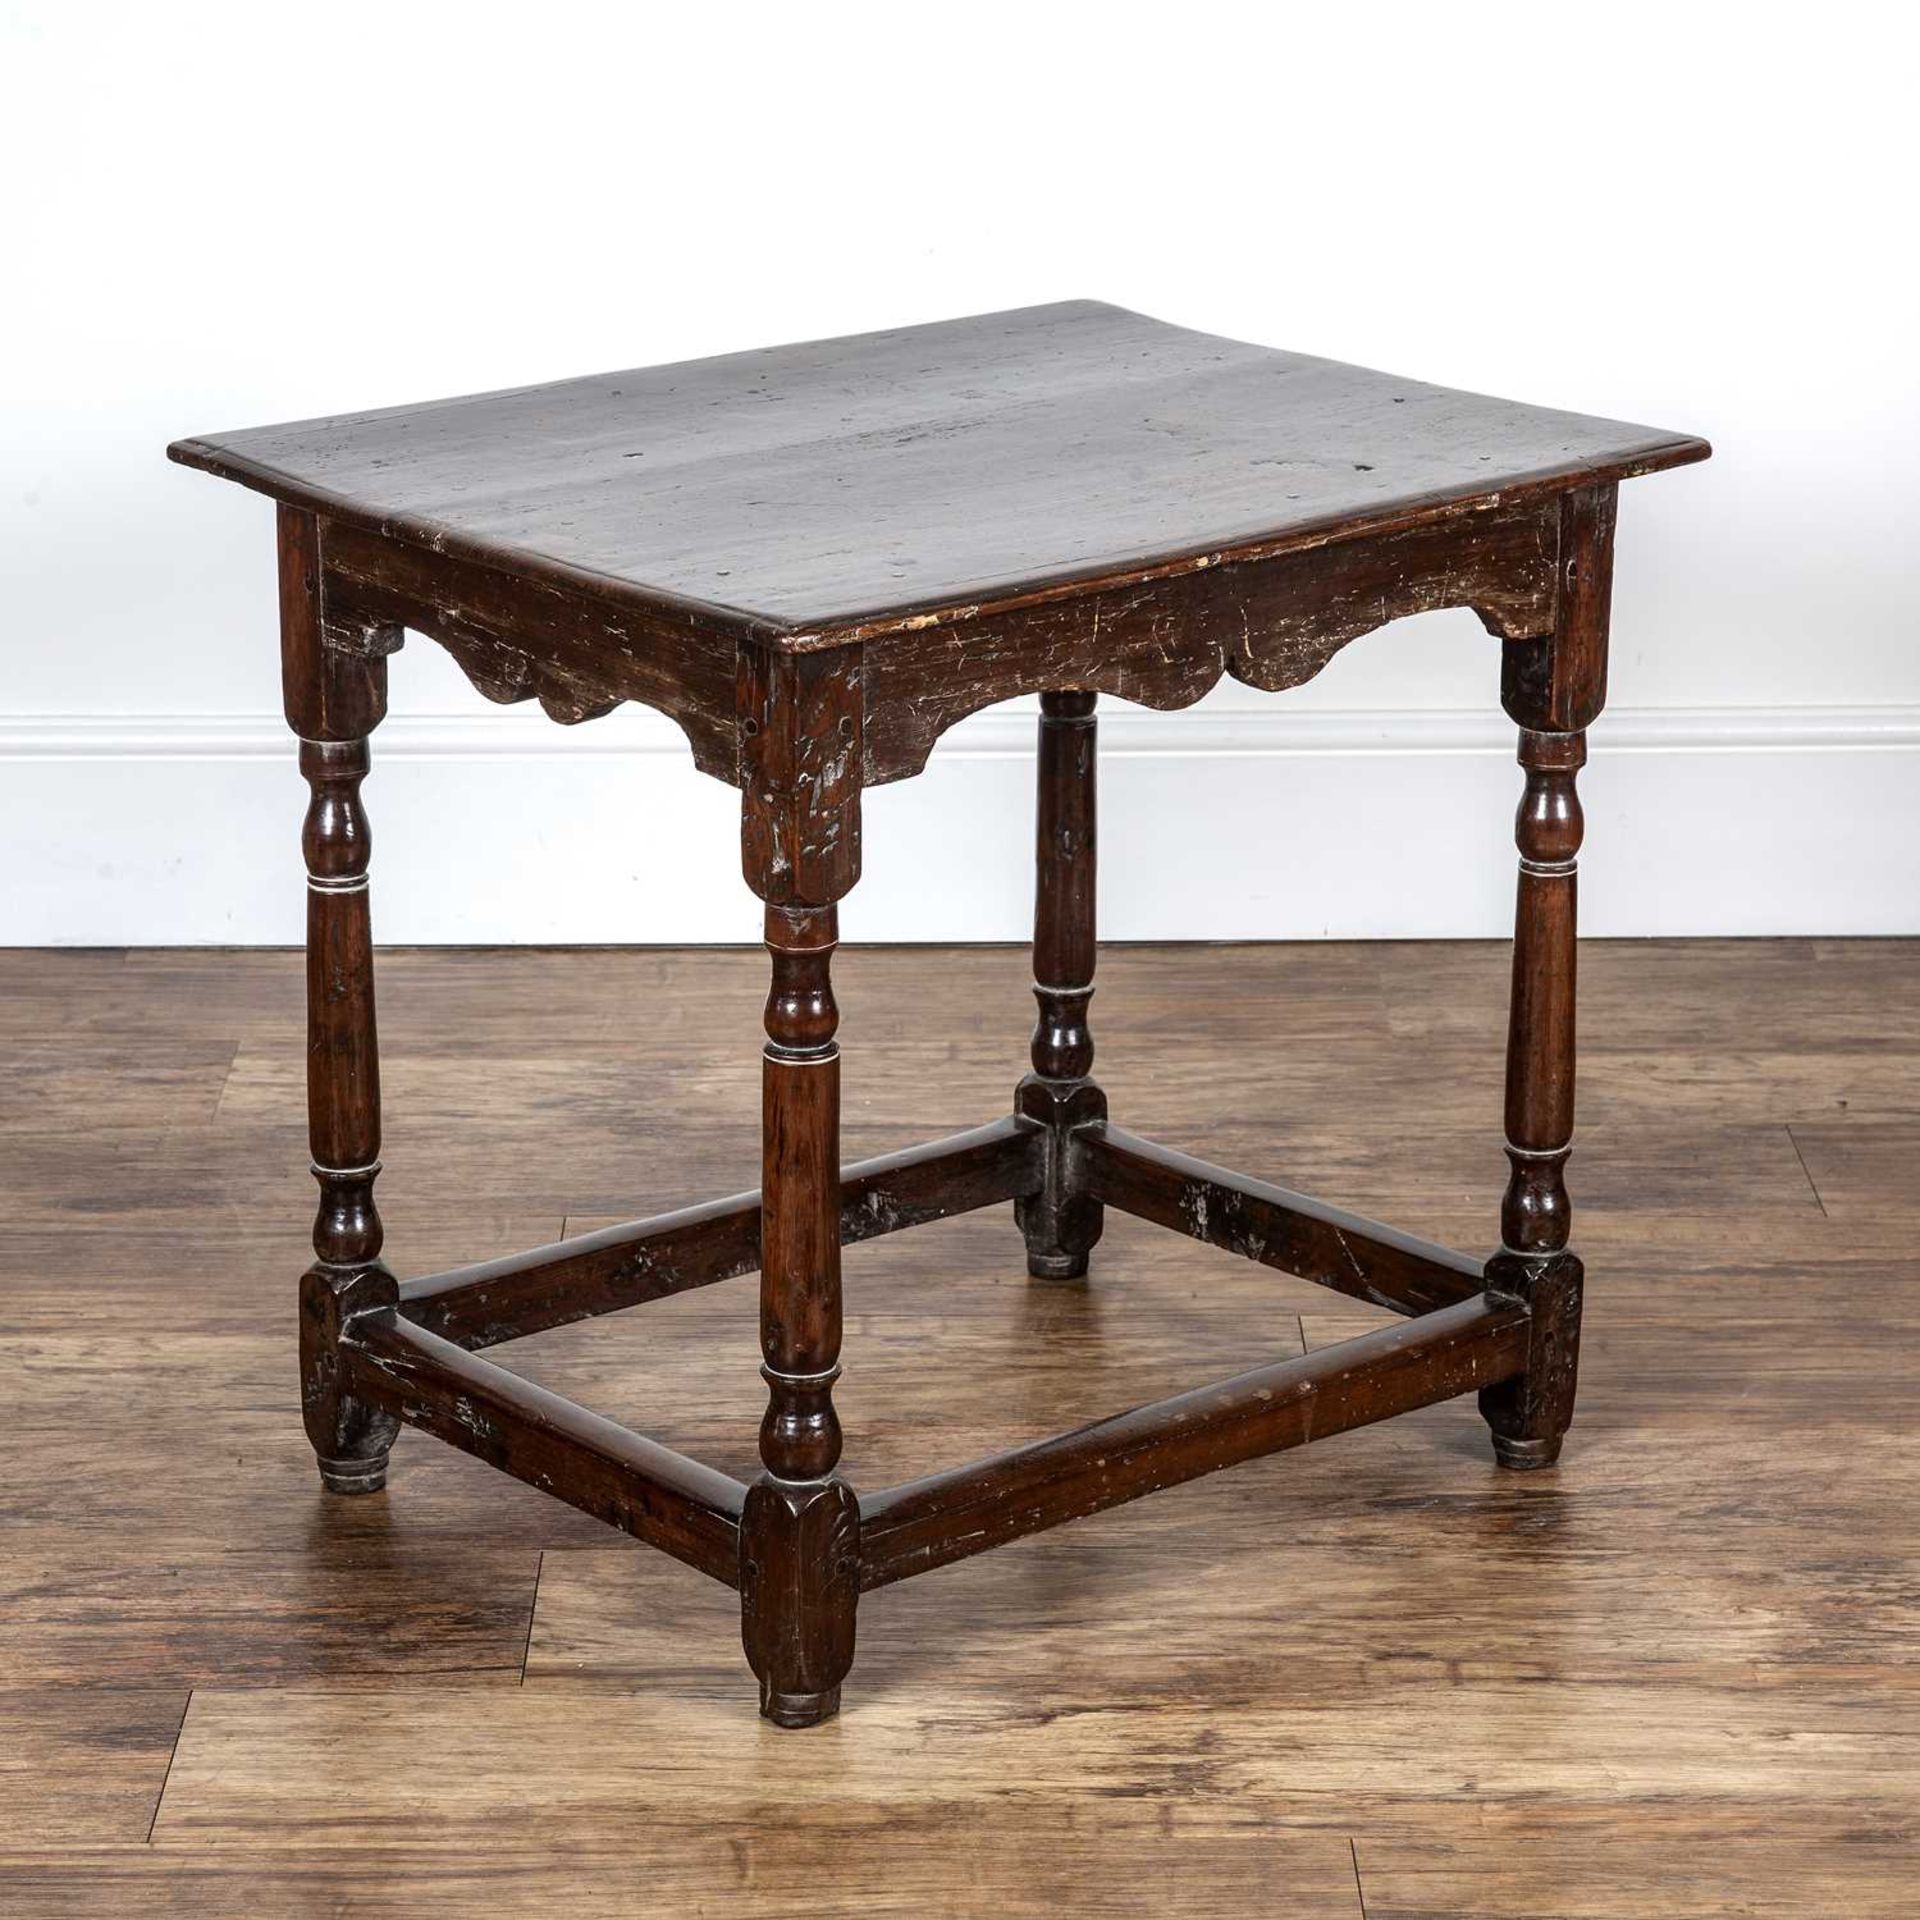 Oak and Yewood side table 18th Century and later, with a rectangular top and shaped frieze, standing